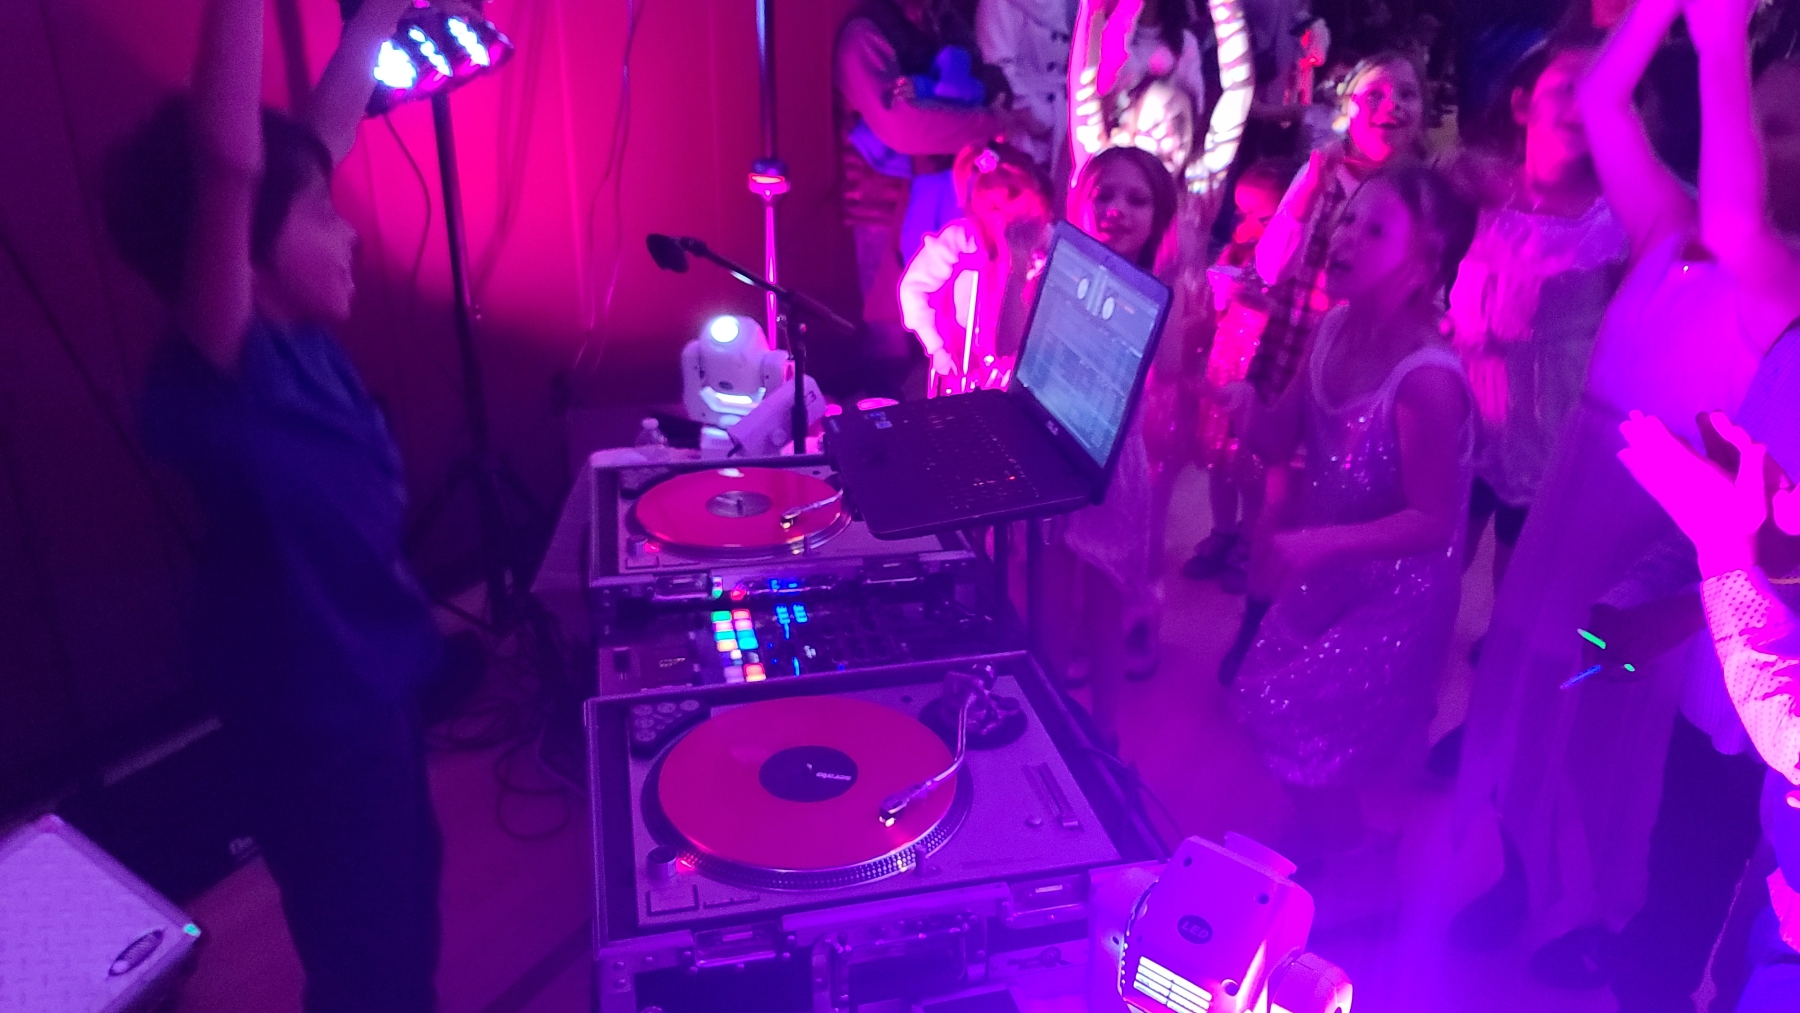 DJ Emerson of Denver's Best DJs got a chance to tag team DJ this Elementary School party at his own school for the Coyote Hills Winter Ball Christmas Party